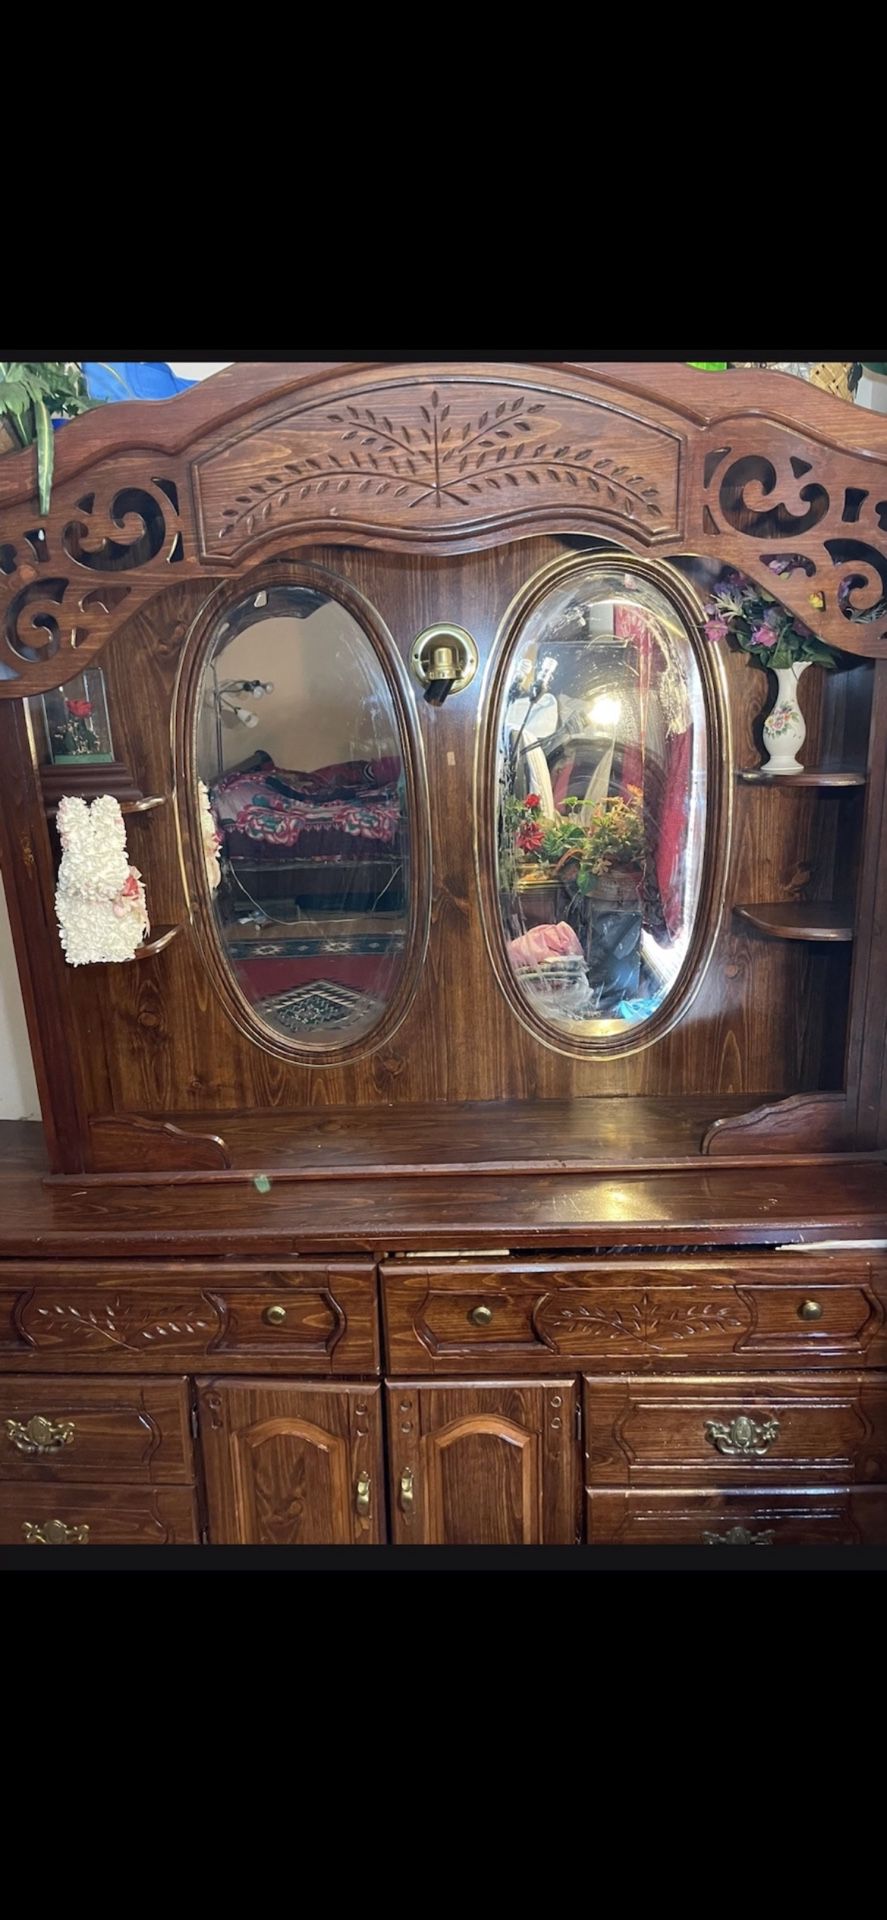 Dresser With Mirrors